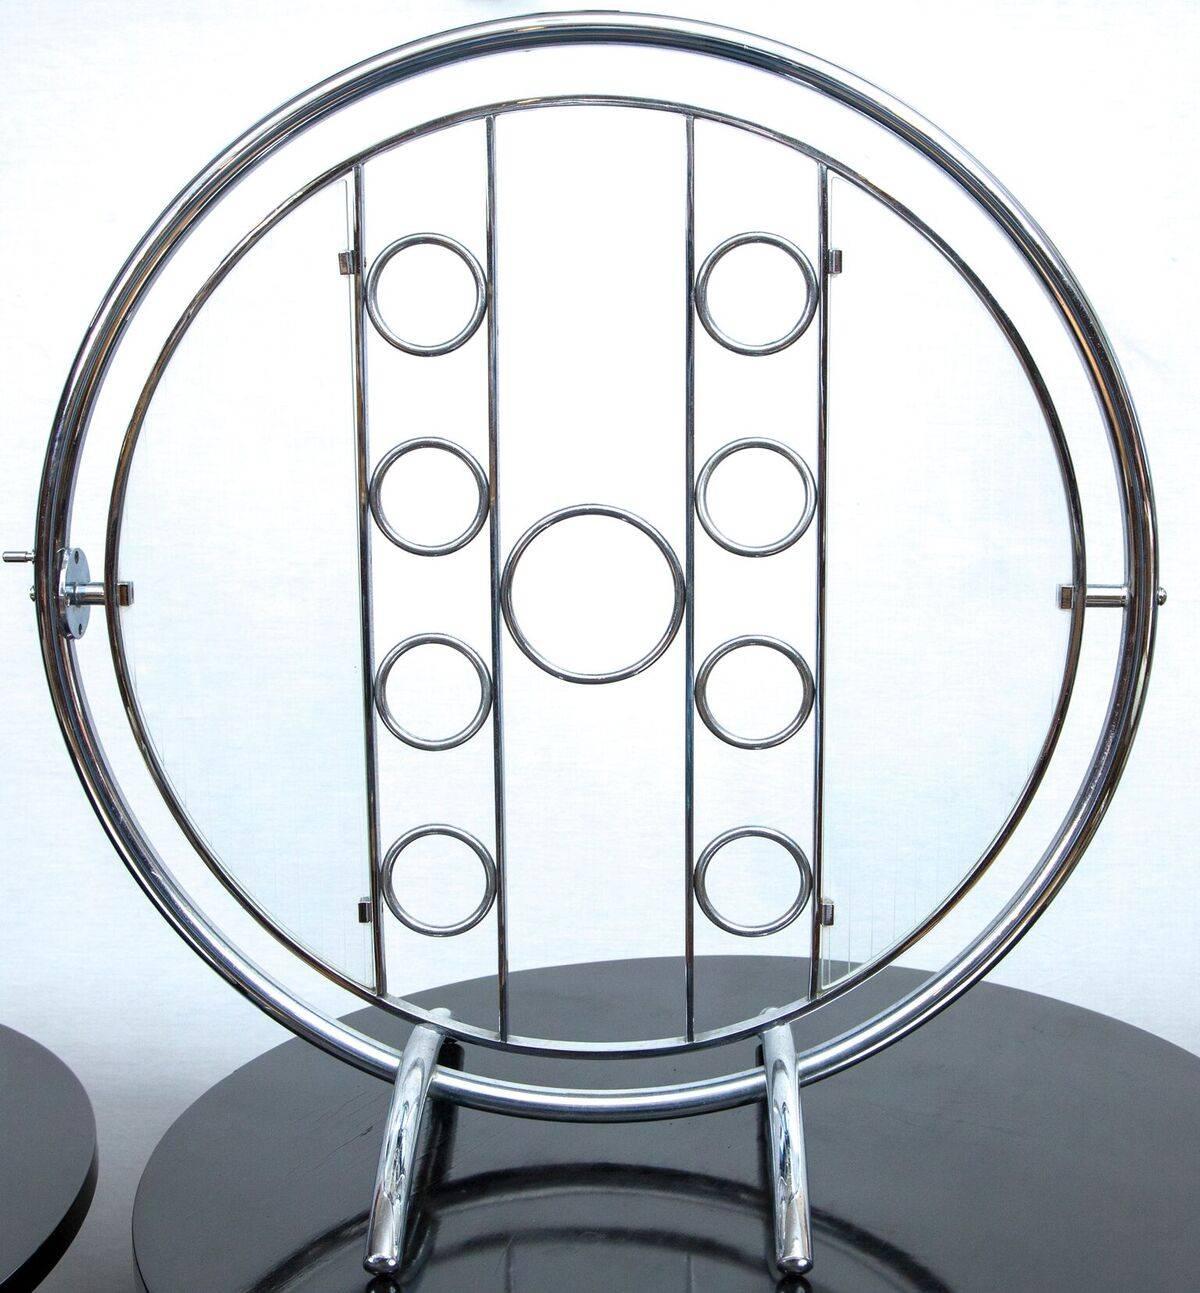 An Art Deco, machine age cocktail table. The table features a round tubular chrome metal framed top, which is held in a swivel frame that allows it to be turned vertically when not in use. The tabletop suspends two half-circle etched glass shelves